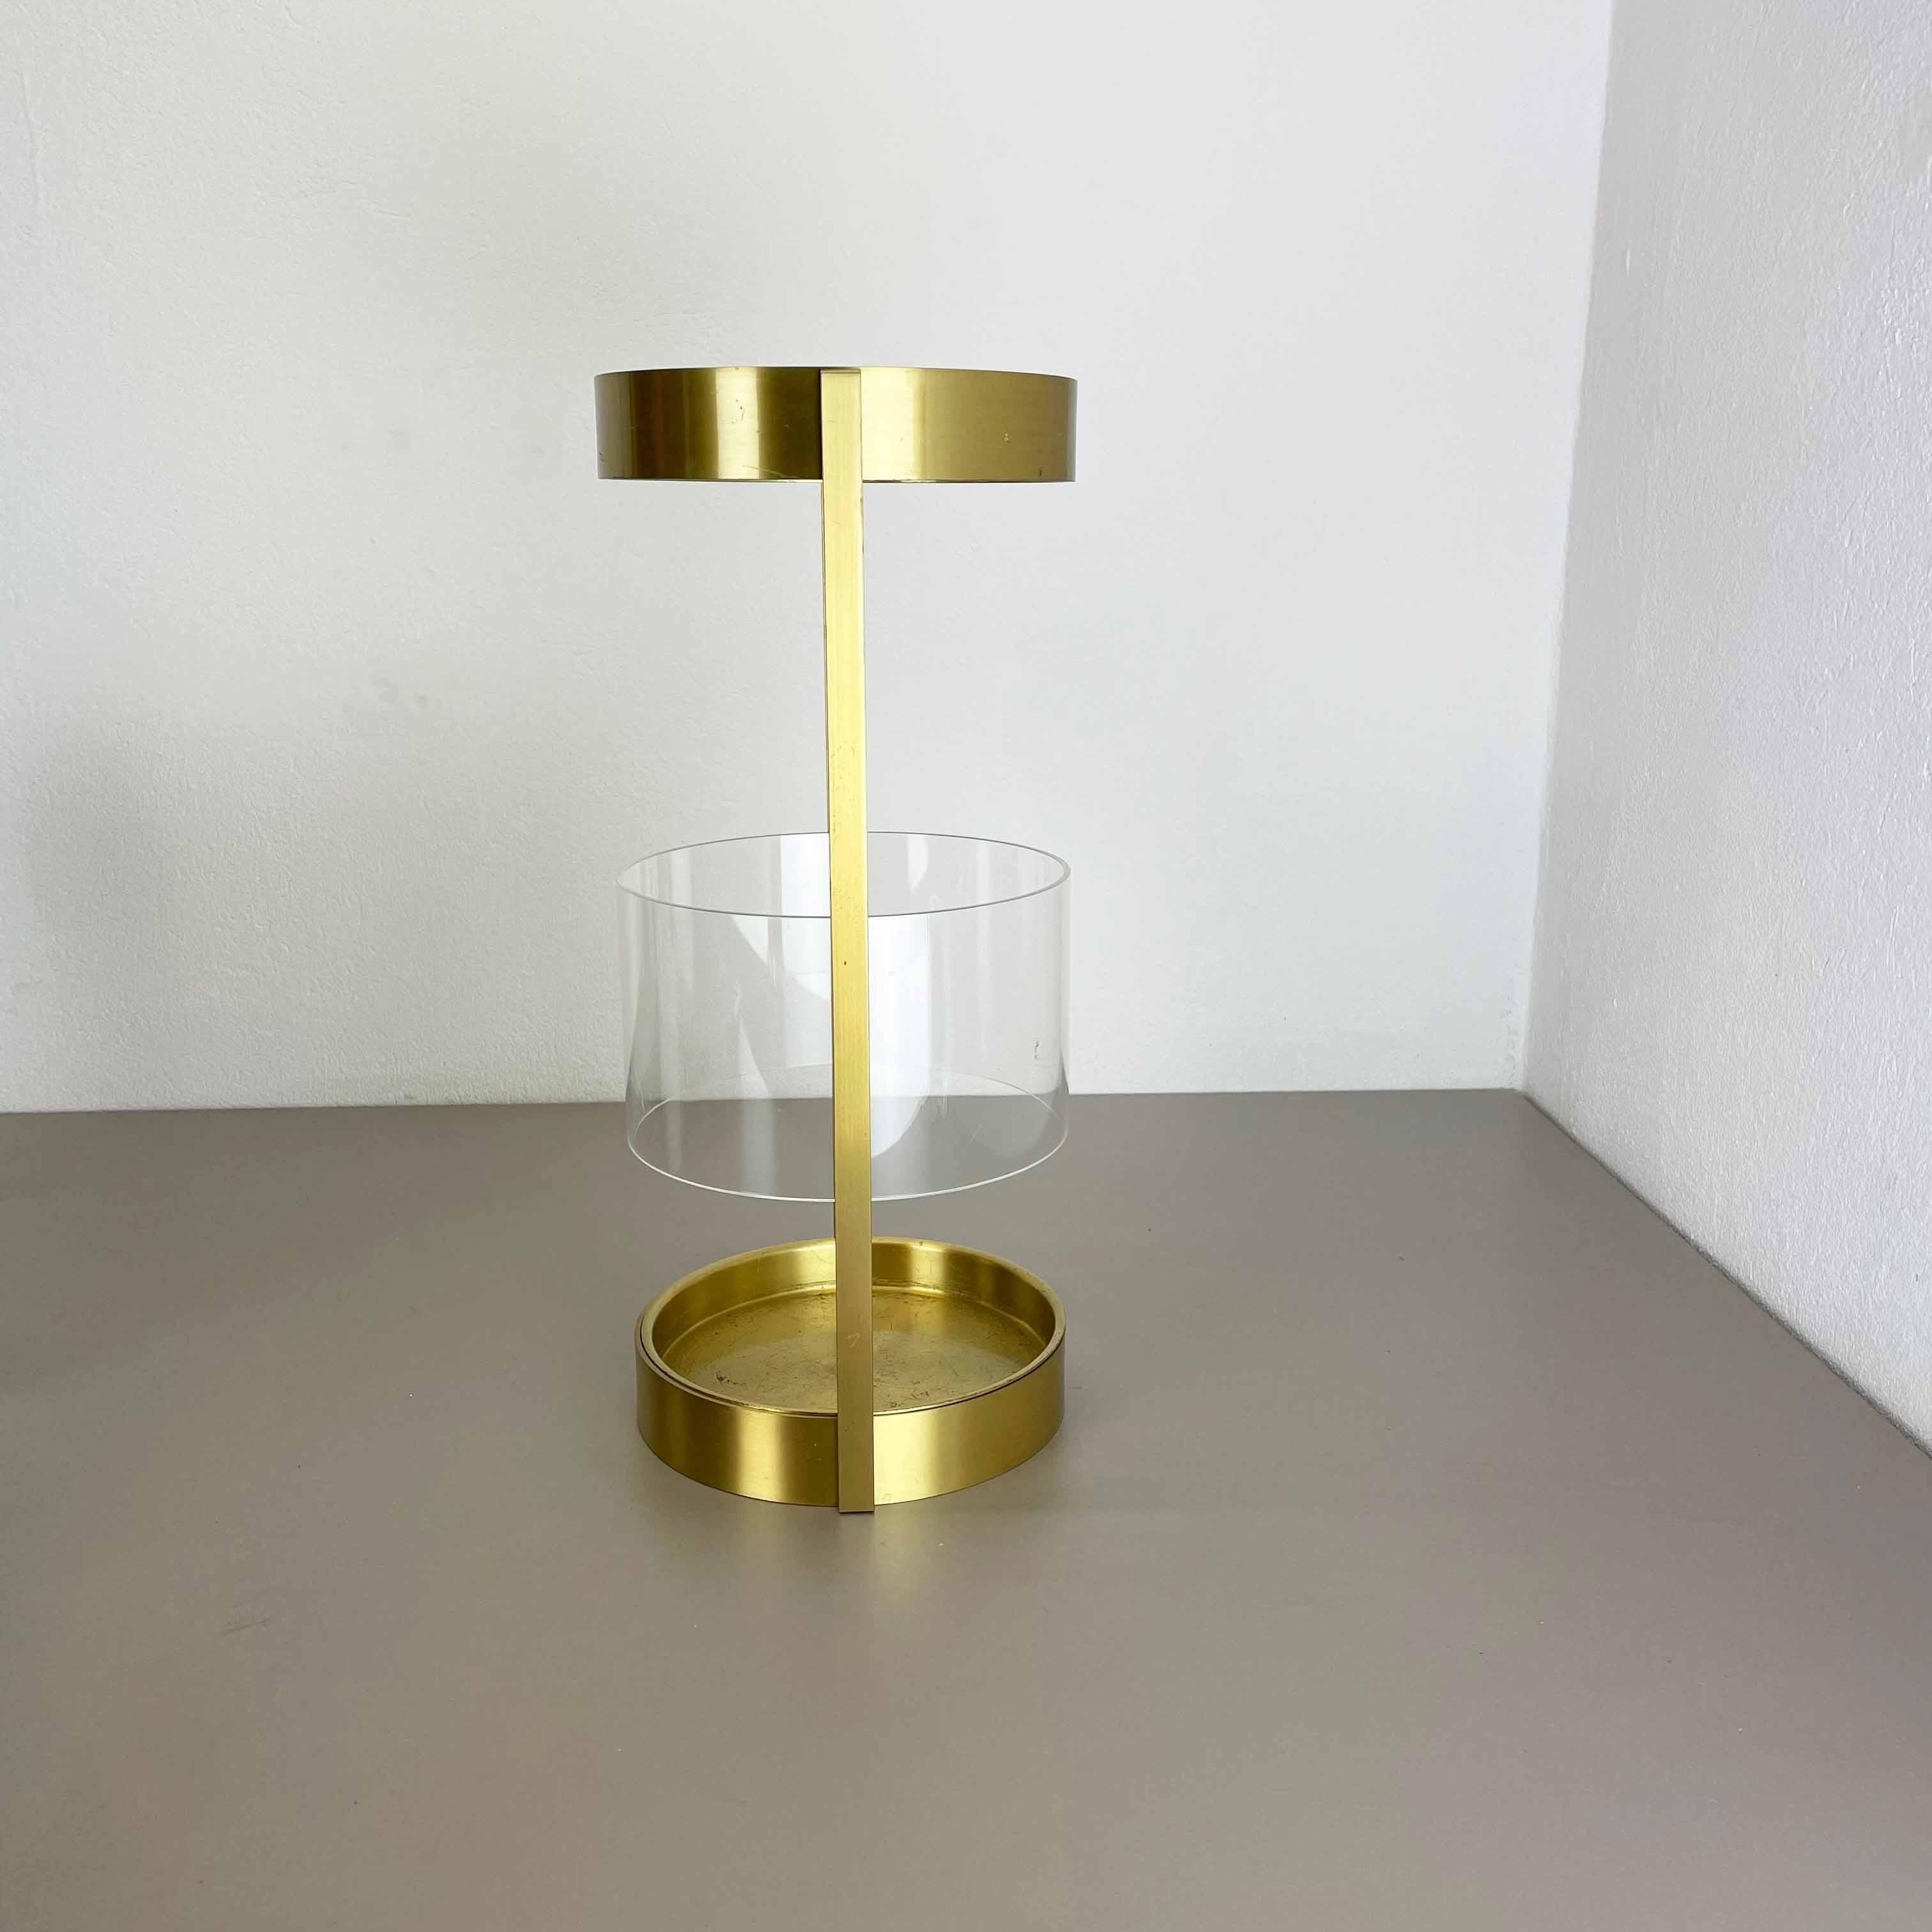 Original Hollywood Regency Solid Brass Acryl Glass Umbrella Stand, Italy, 1970s For Sale 12